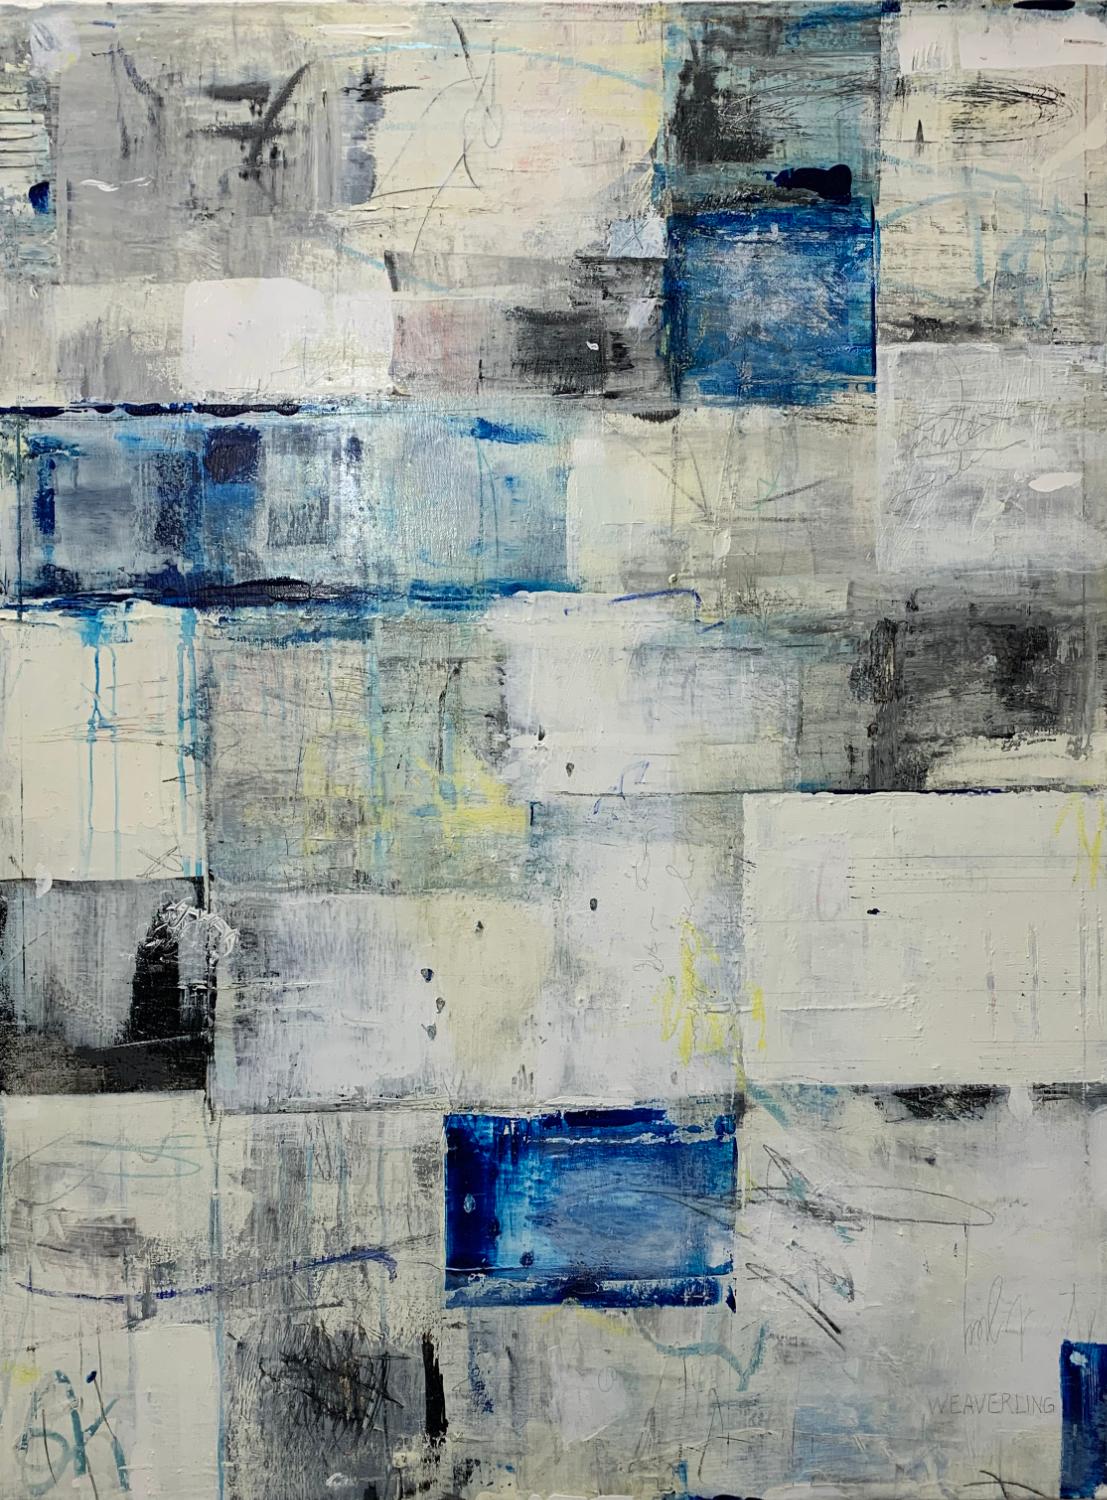 Listen, Abstract Painting - Mixed Media Art by Julie Weaverling